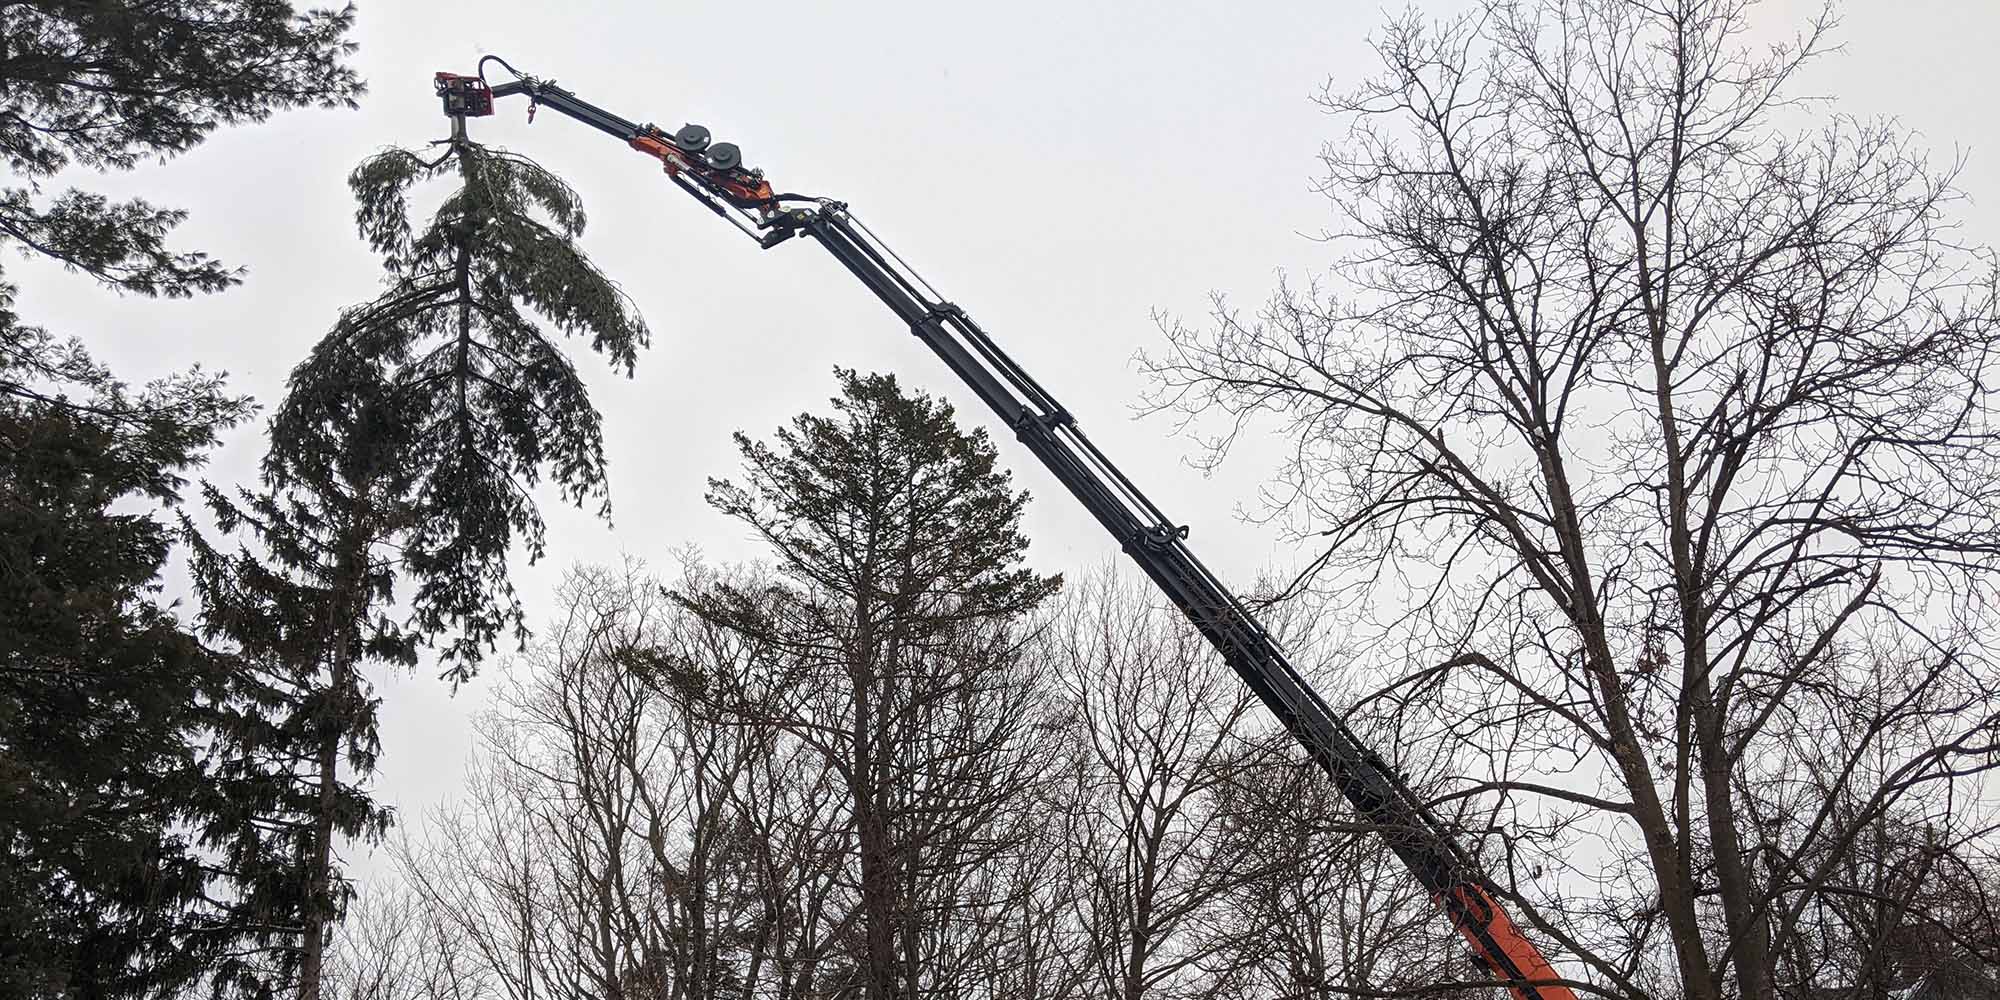 Bark Busters Tree Services of Westwood, MA. Licensed & Insured Tree Removal, Pruning, & Pest Control Arborist of Greater Boston. 781-320-9800